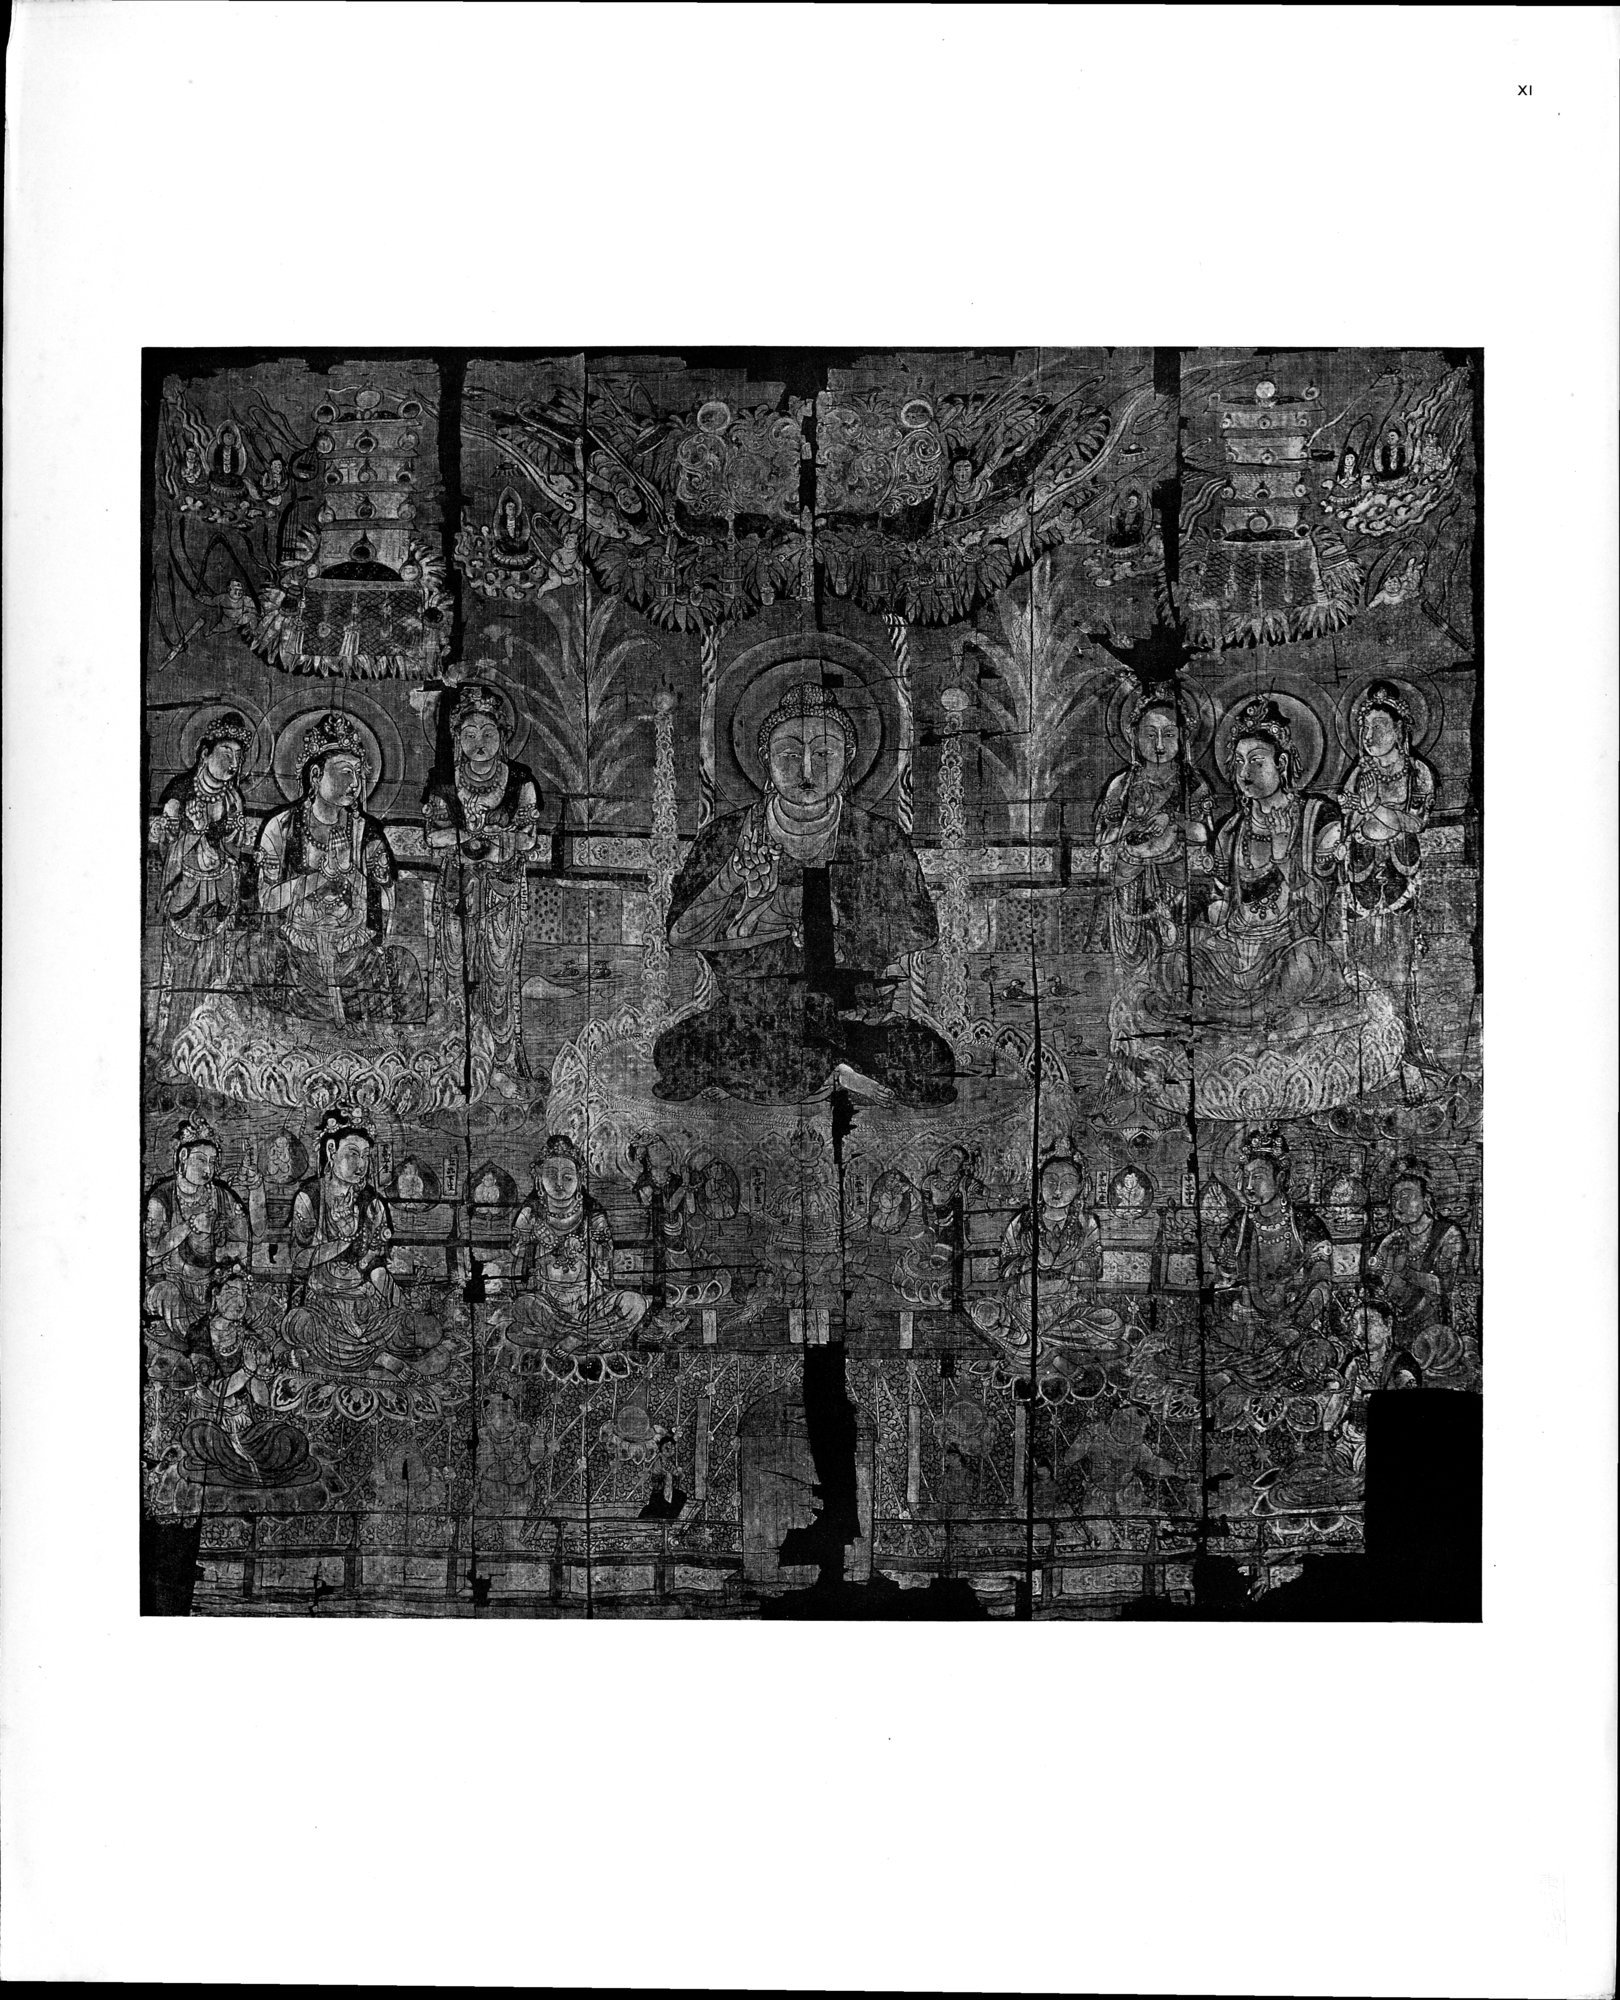 The Thousand Buddhas : vol.1 / Page 96 (Grayscale High Resolution Image)